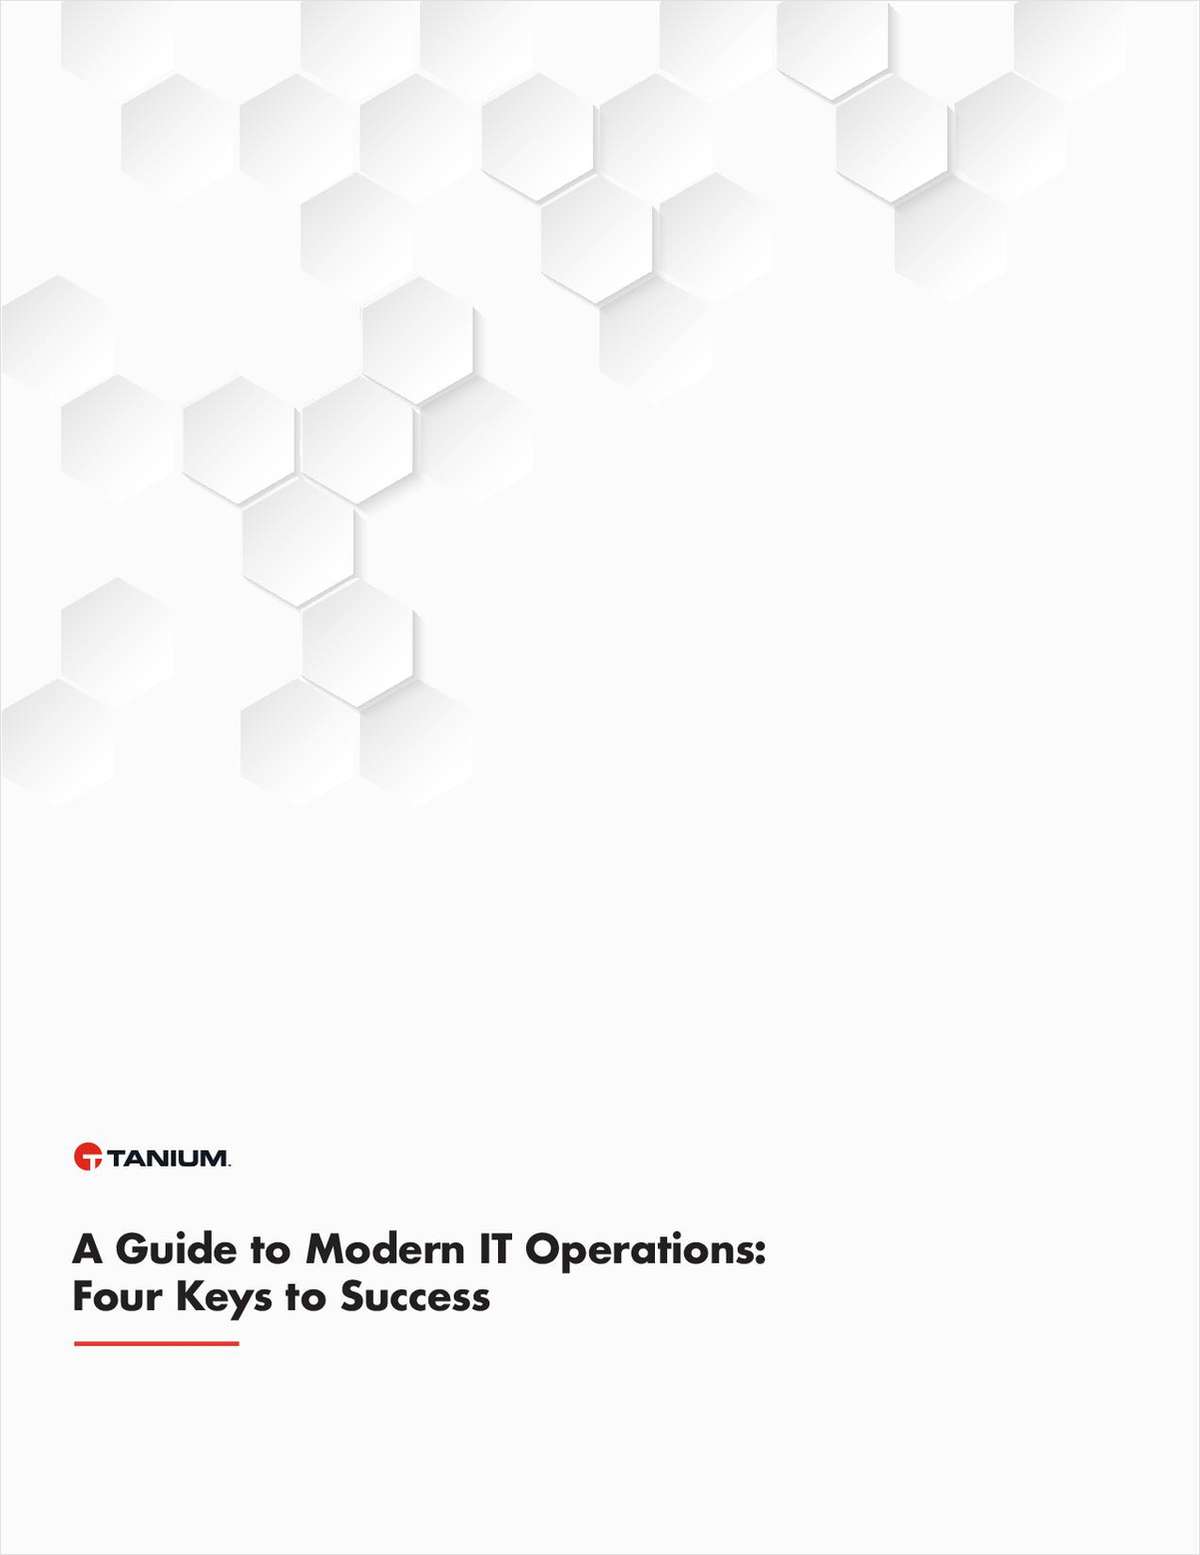 Ultimate Guide to Modern IT Ops - 4 Keys to Success